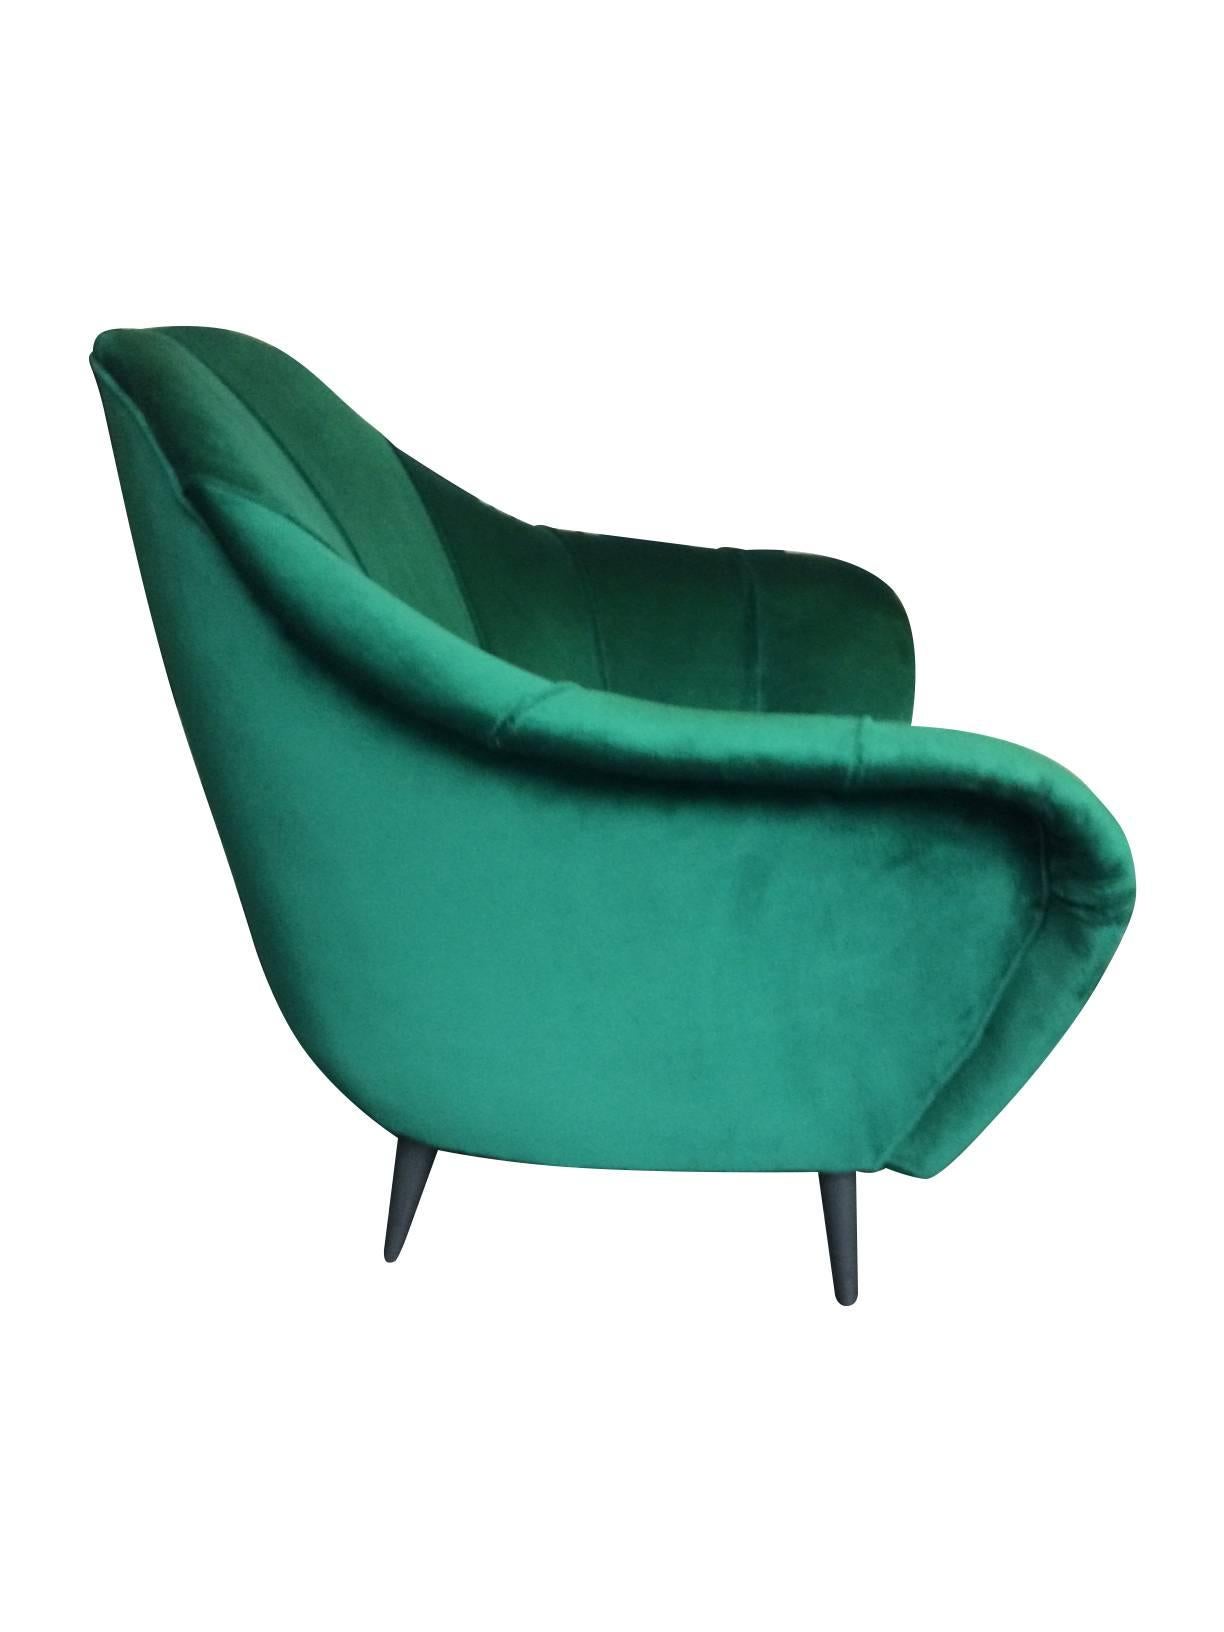 A beautiful Italian armchair in the style of Gio Ponti newly re-upholstered in emerald green velvet, with pleated back and ebonized wooden legs. Also see matching sofa available too.